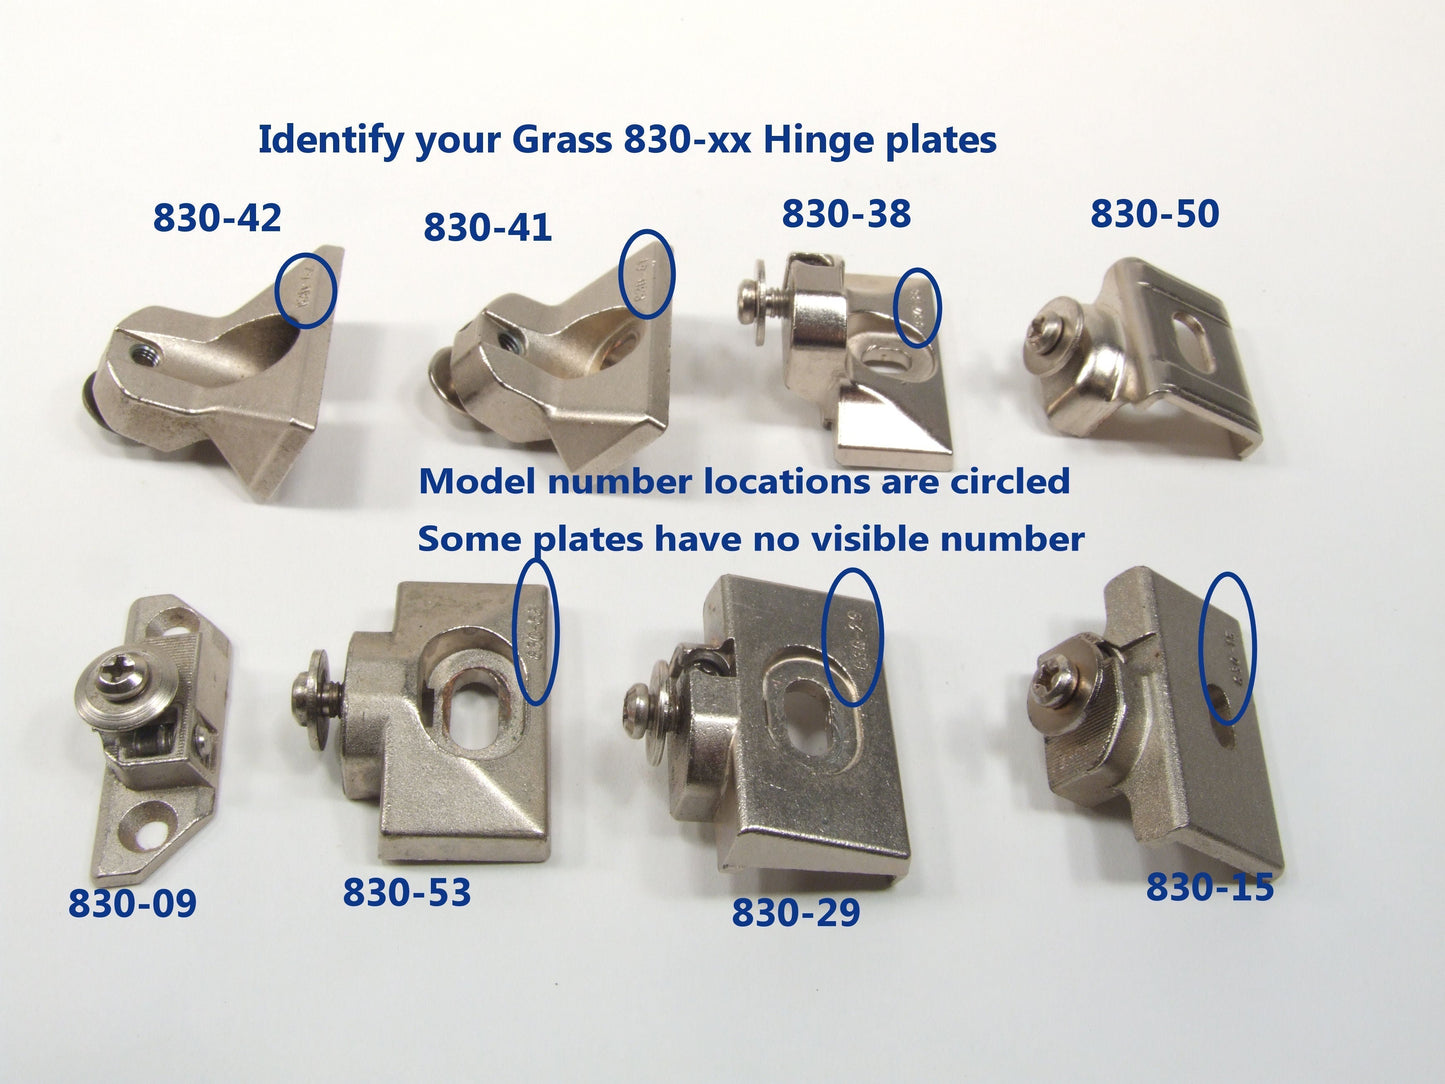 Grass 830-29 Soft Close Replacement Hinges - Sold as PAIRS!